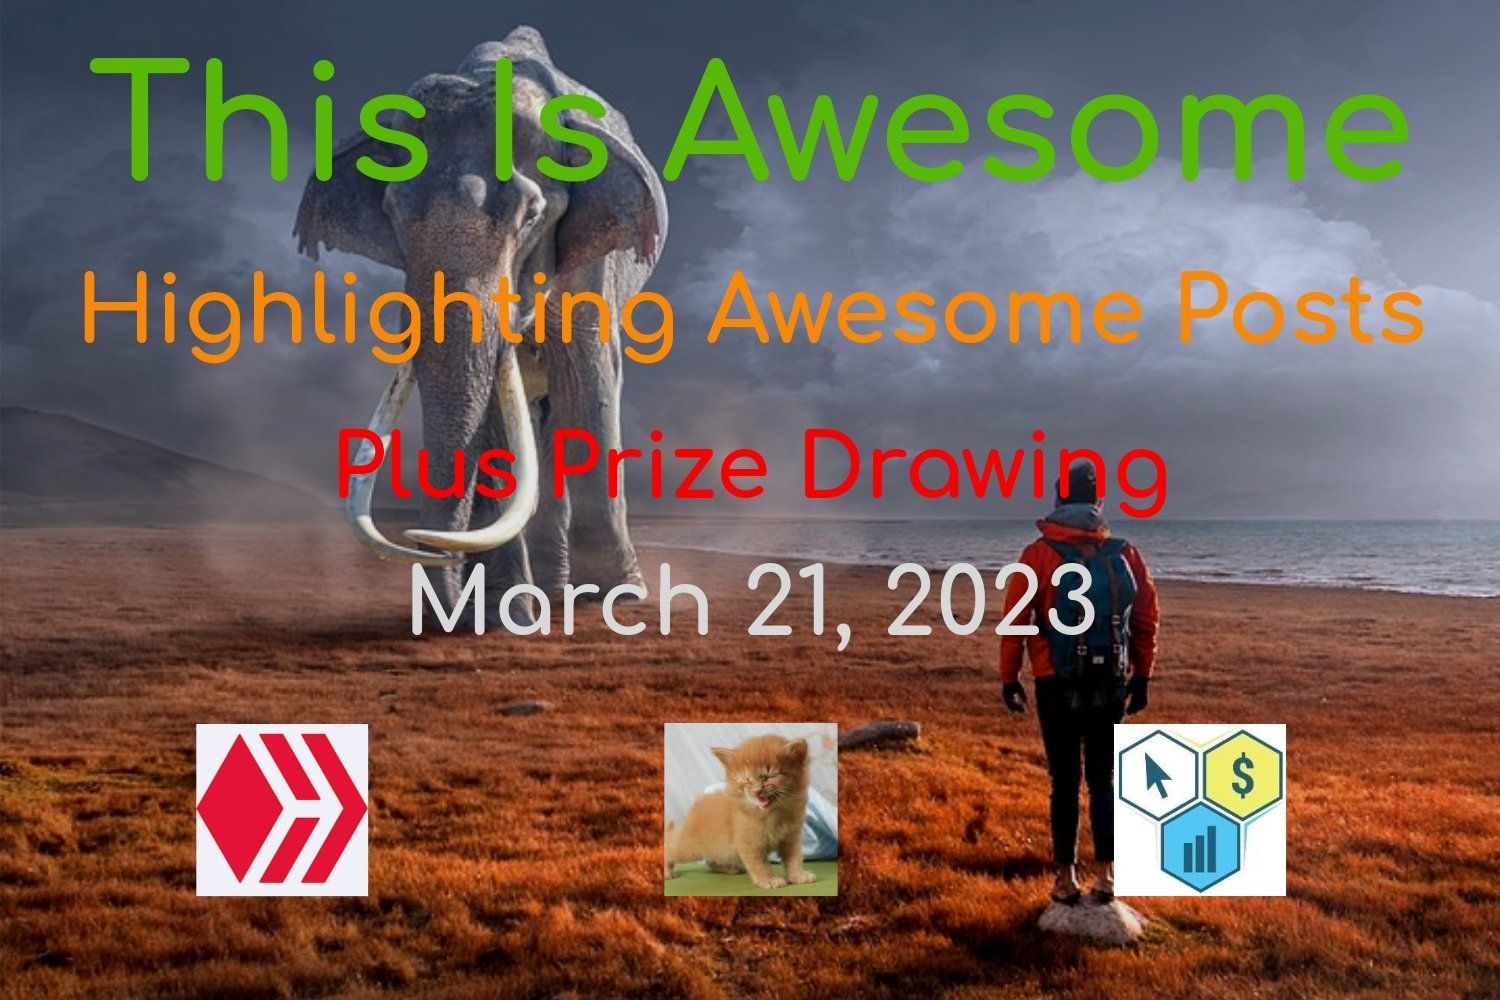 @thisisawesome/this-is-awesome-highlighting-awesome-posts-plus-prize-drawing-march-21-2023